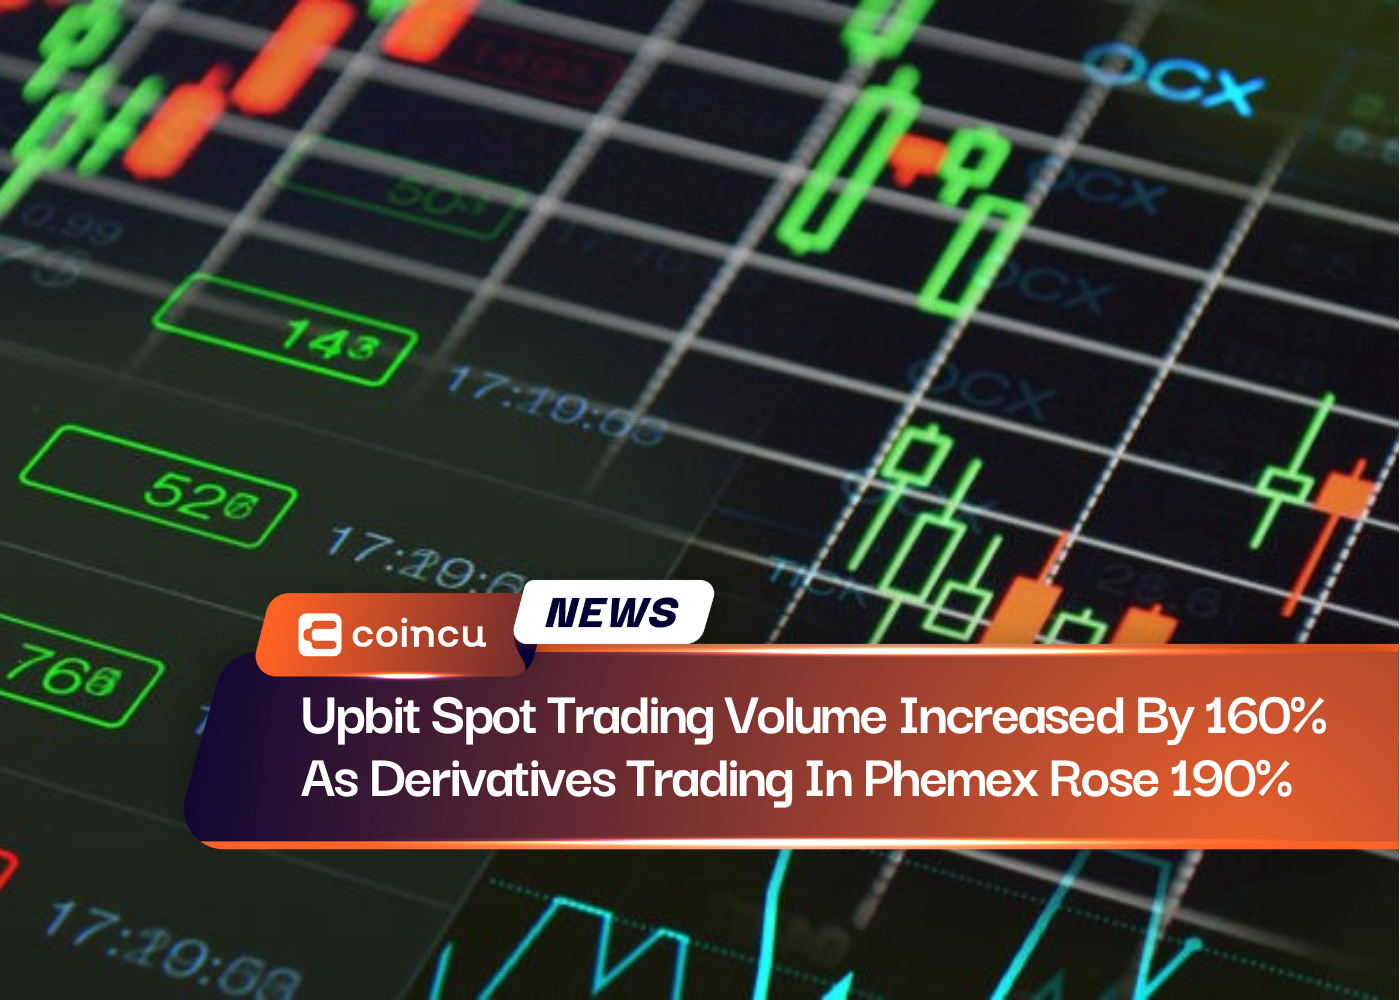 Upbit Spot Trading Volume Increased By 160% As Derivatives Trading In Phemex Rose 190%